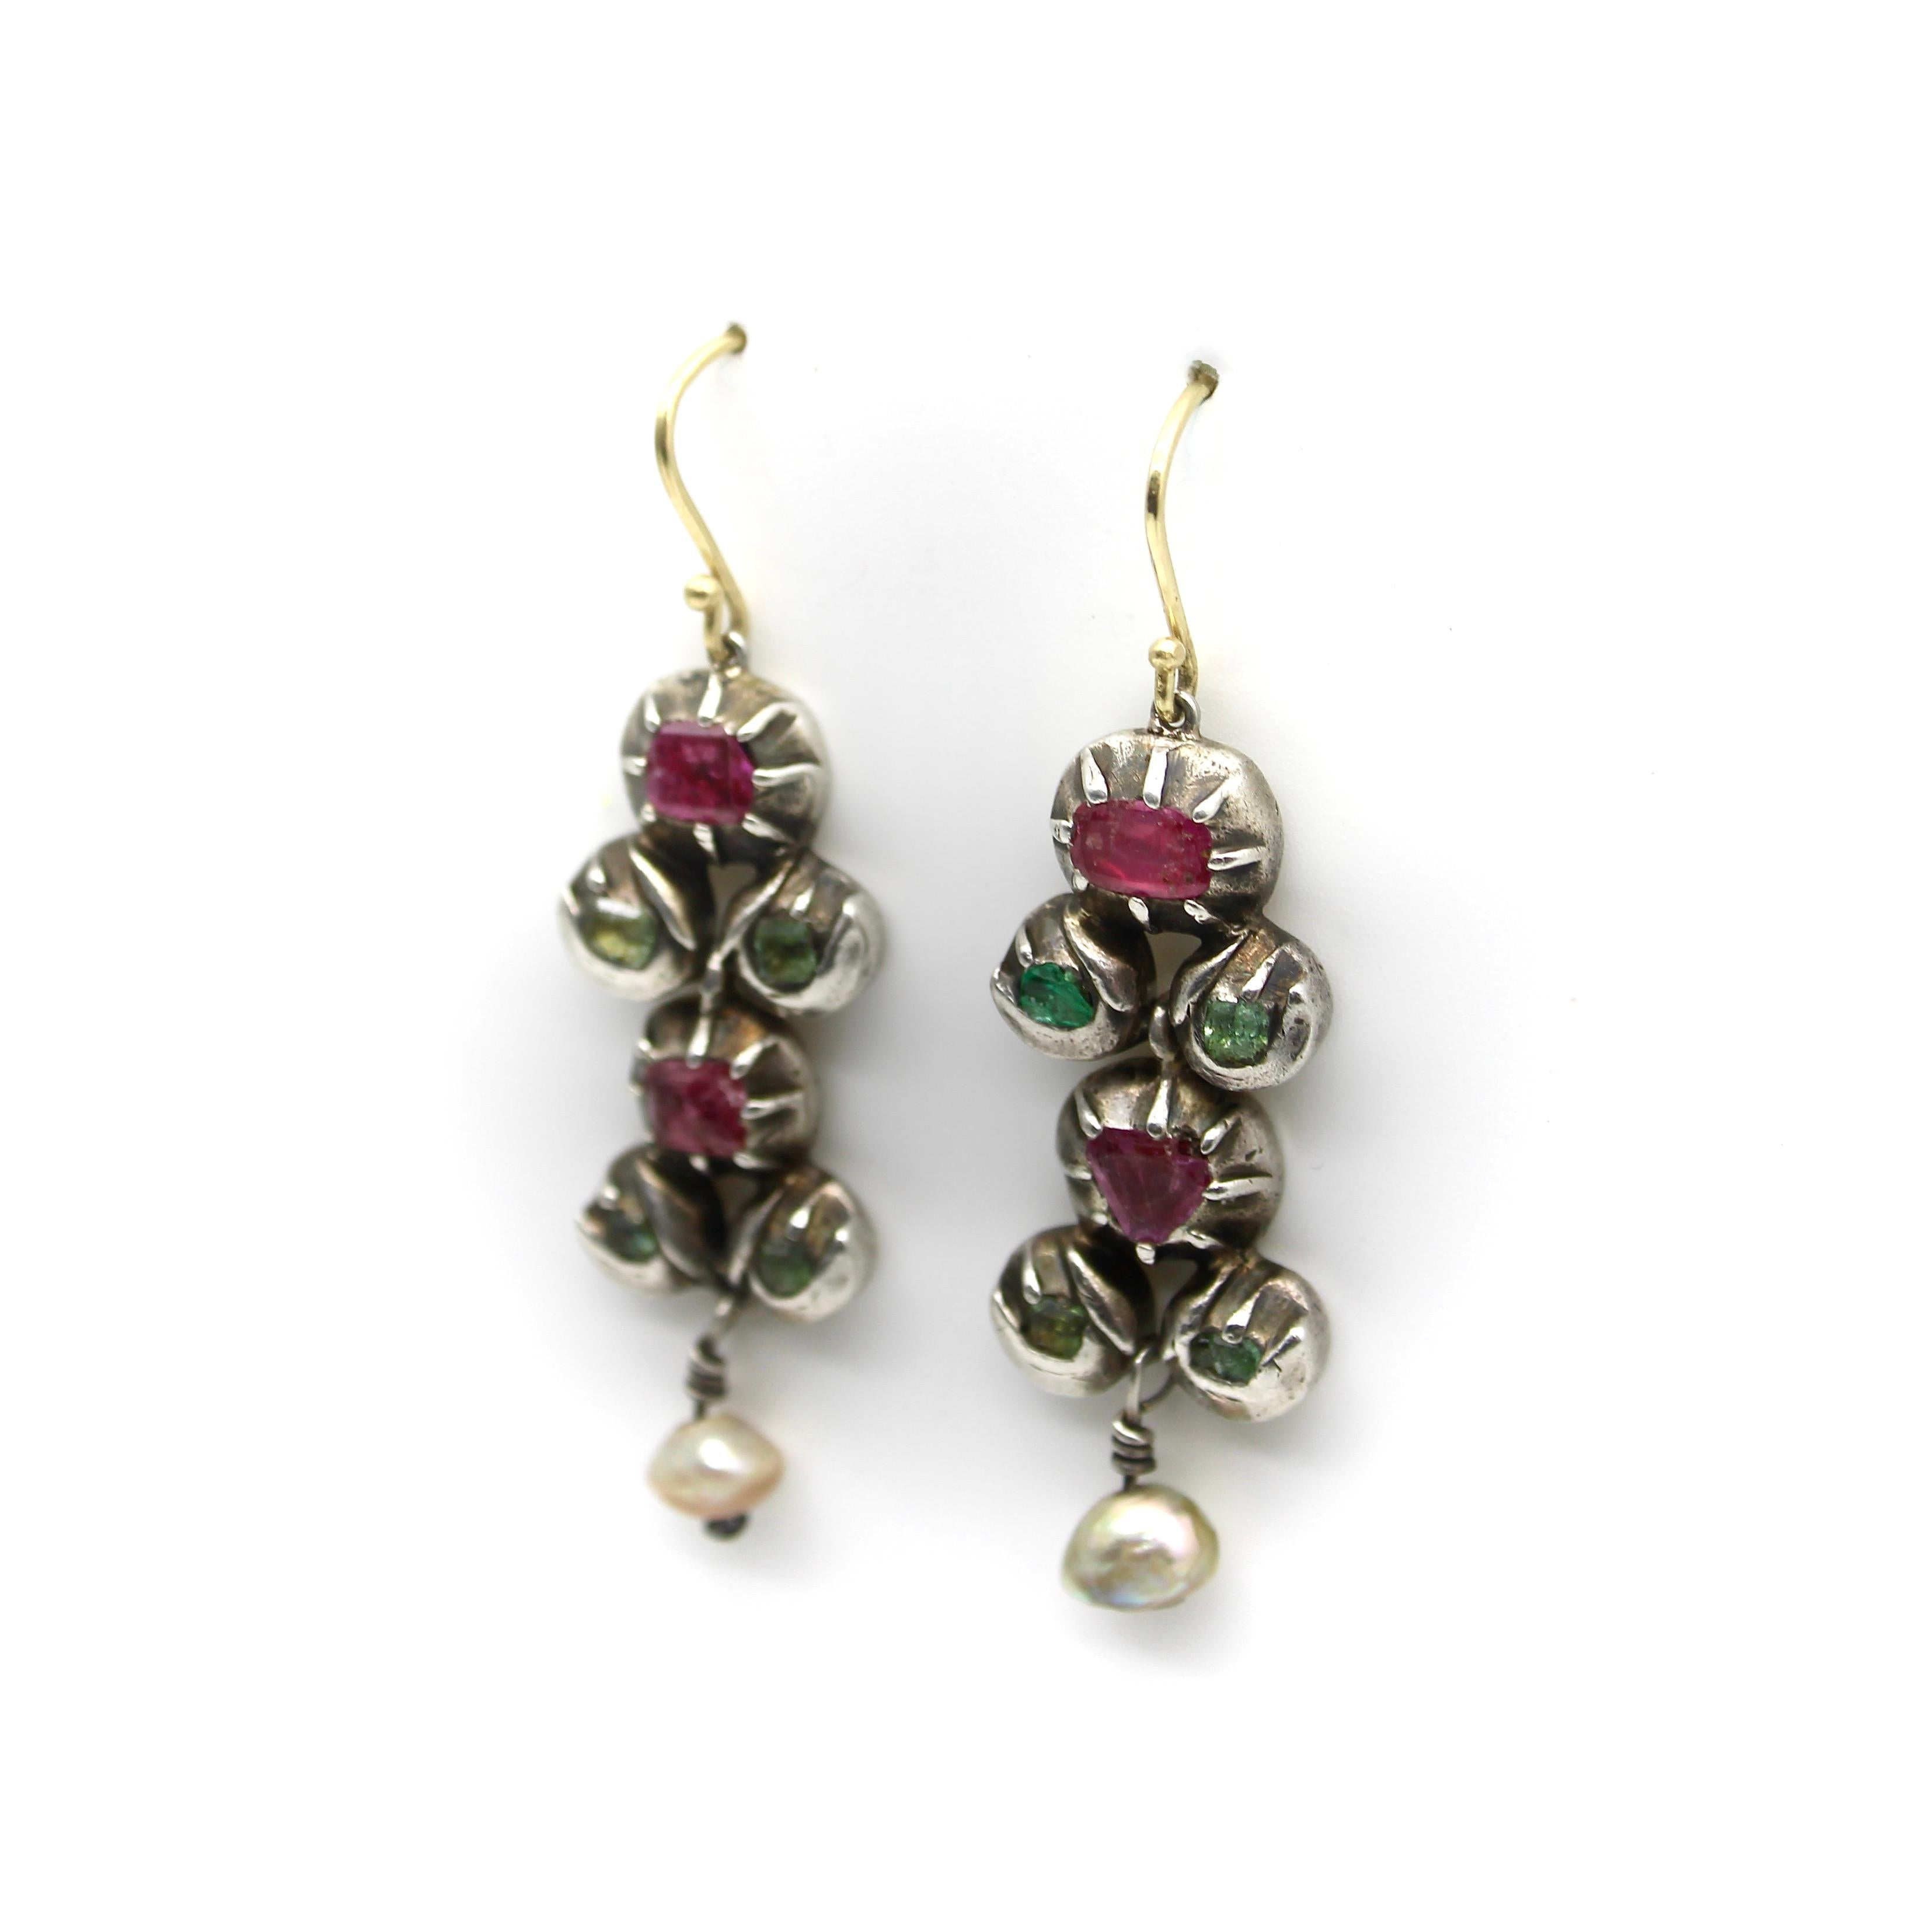 These beautiful sterling silver and 18k gold earrings are styled after the Giardinetti jewelry that was popular during the Georgian era. Giardinetti, meaning “Little Garden” in Italian, originated in the 17th century and was popular throughout the